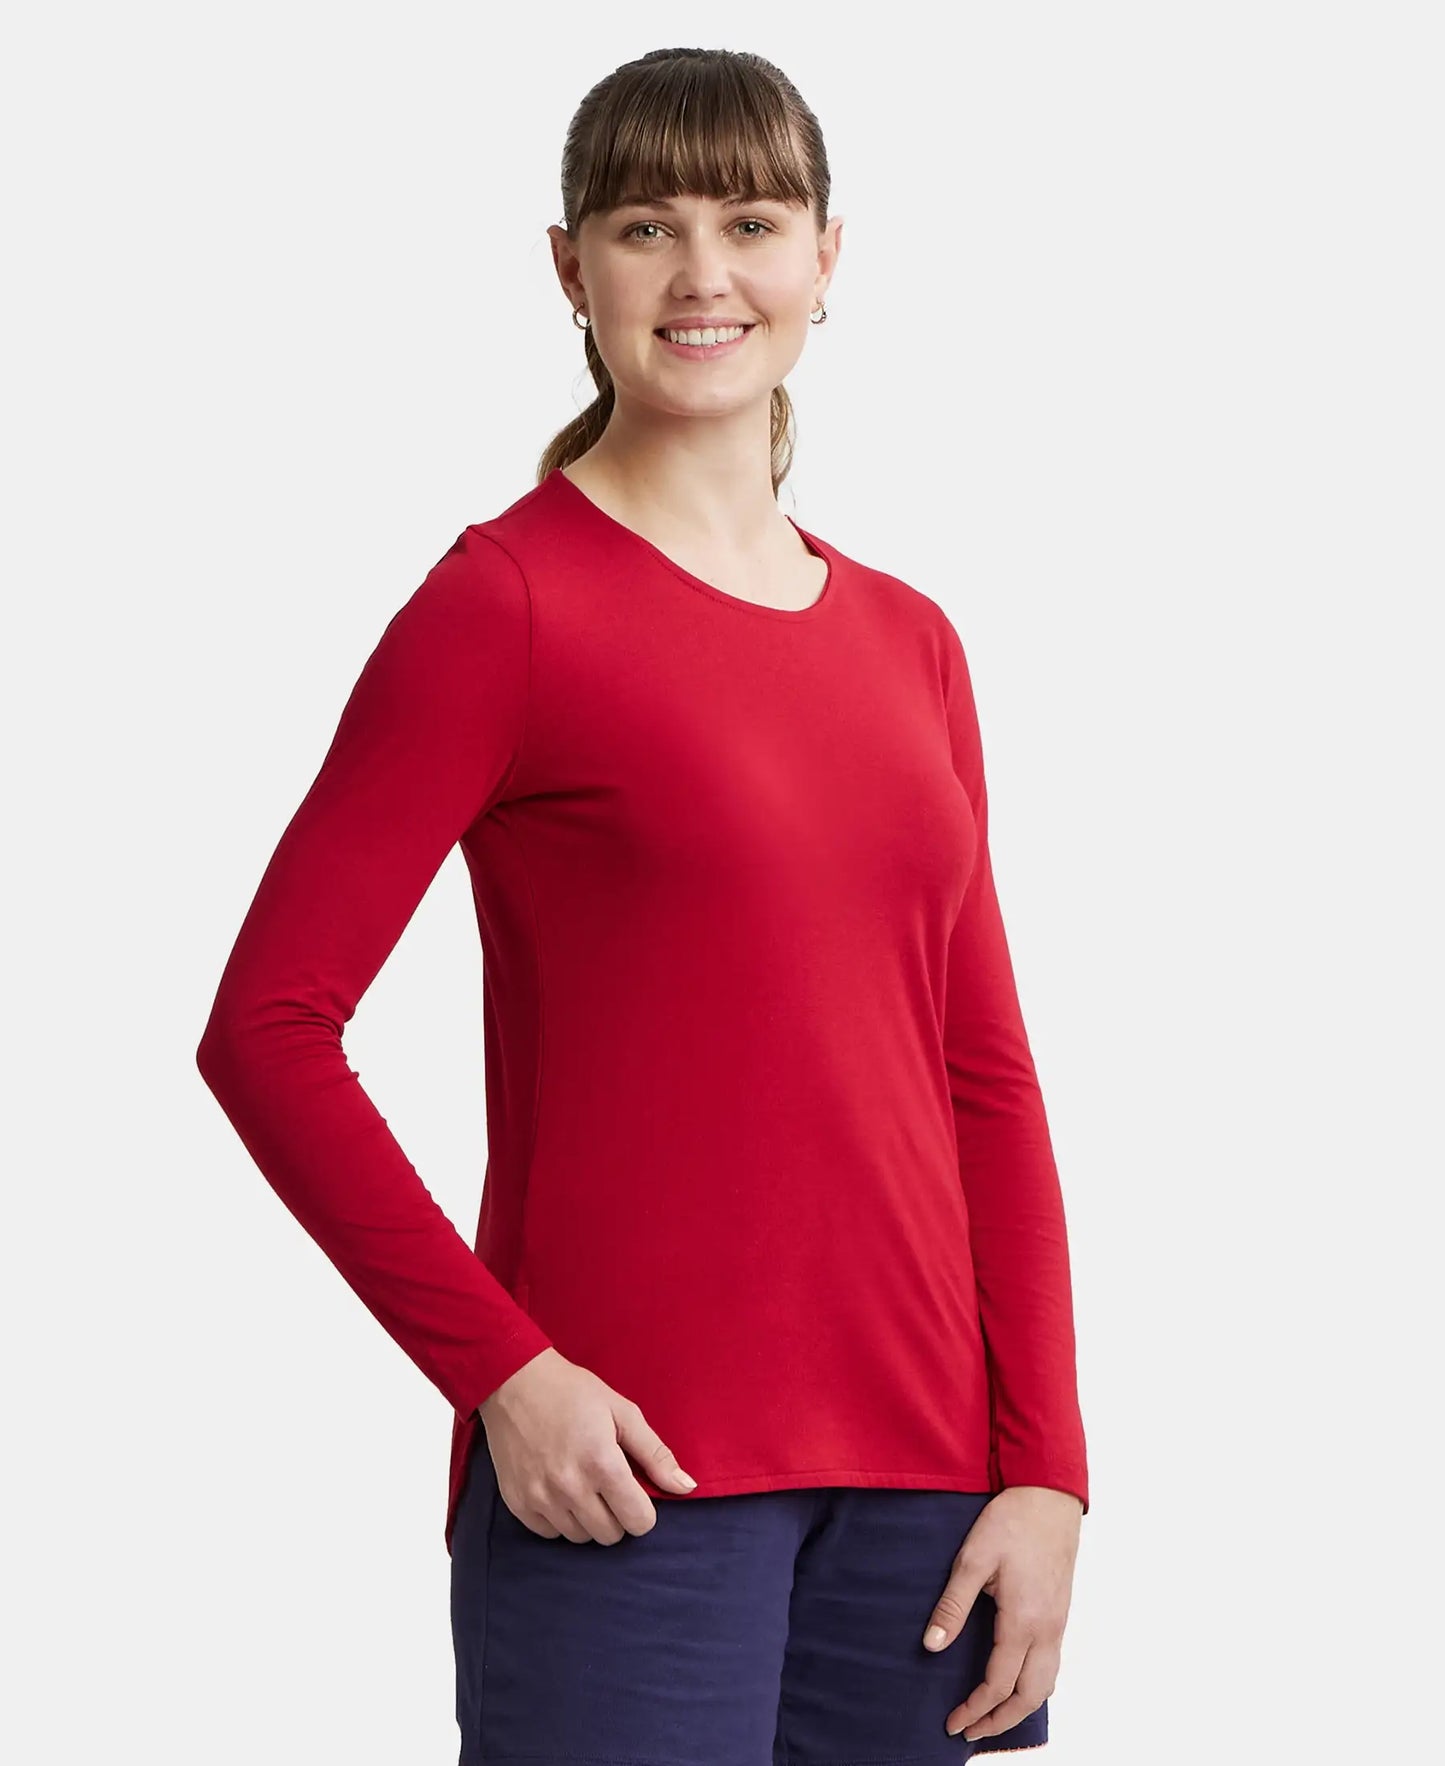 Micro Modal Cotton Relaxed Fit Solid Round Neck Full Sleeve T-Shirt with Curved Hem Styling - Jester Red-2